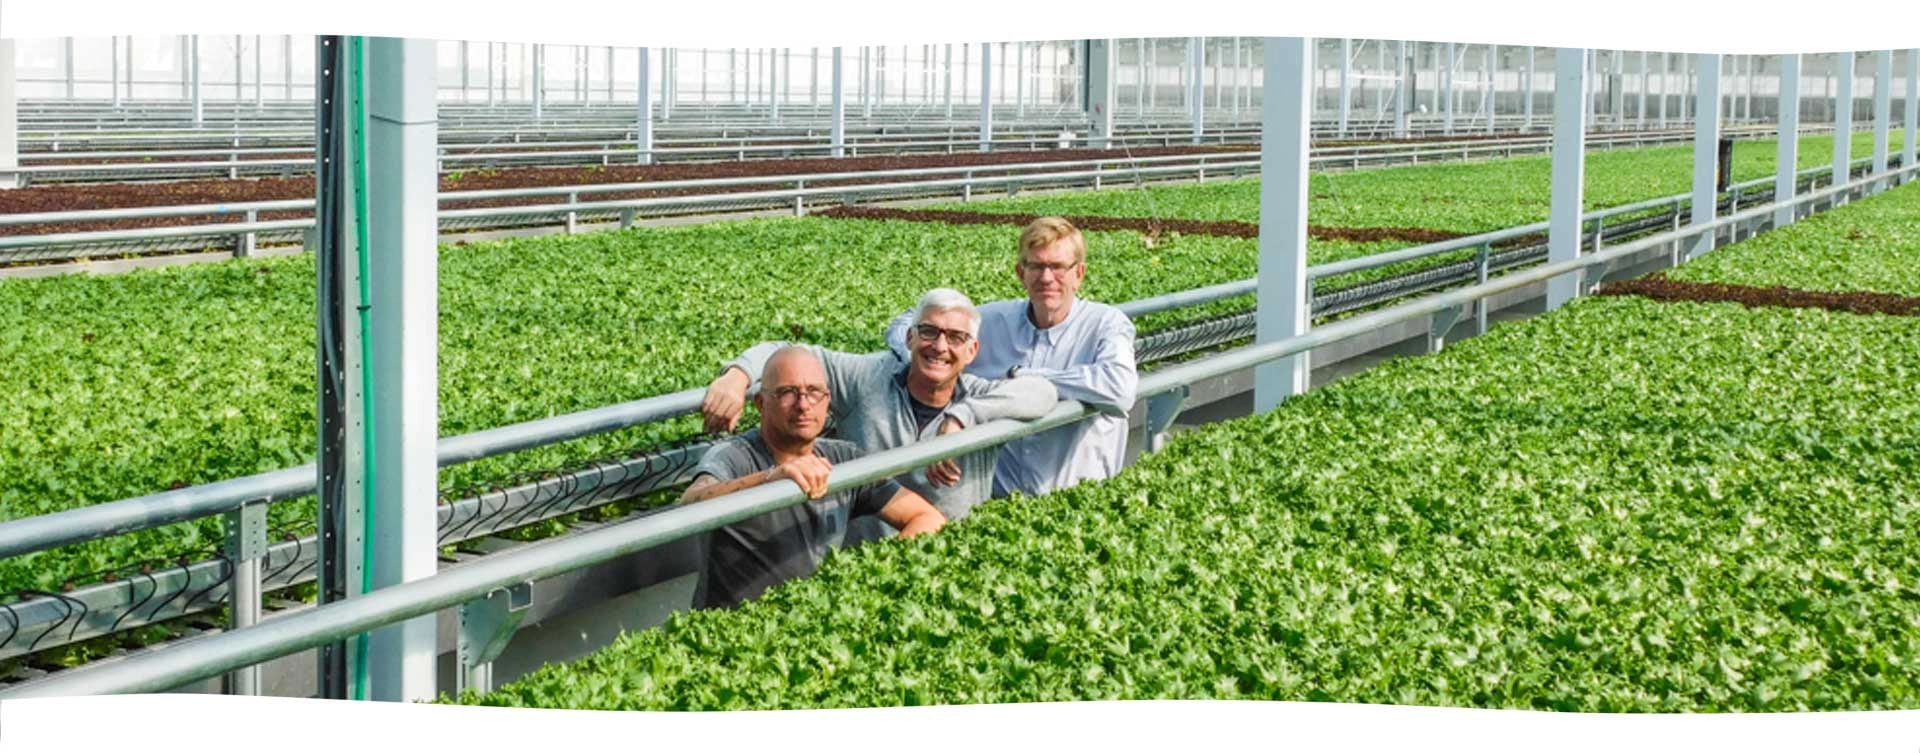 our story little leaf lettuce CEO and founders